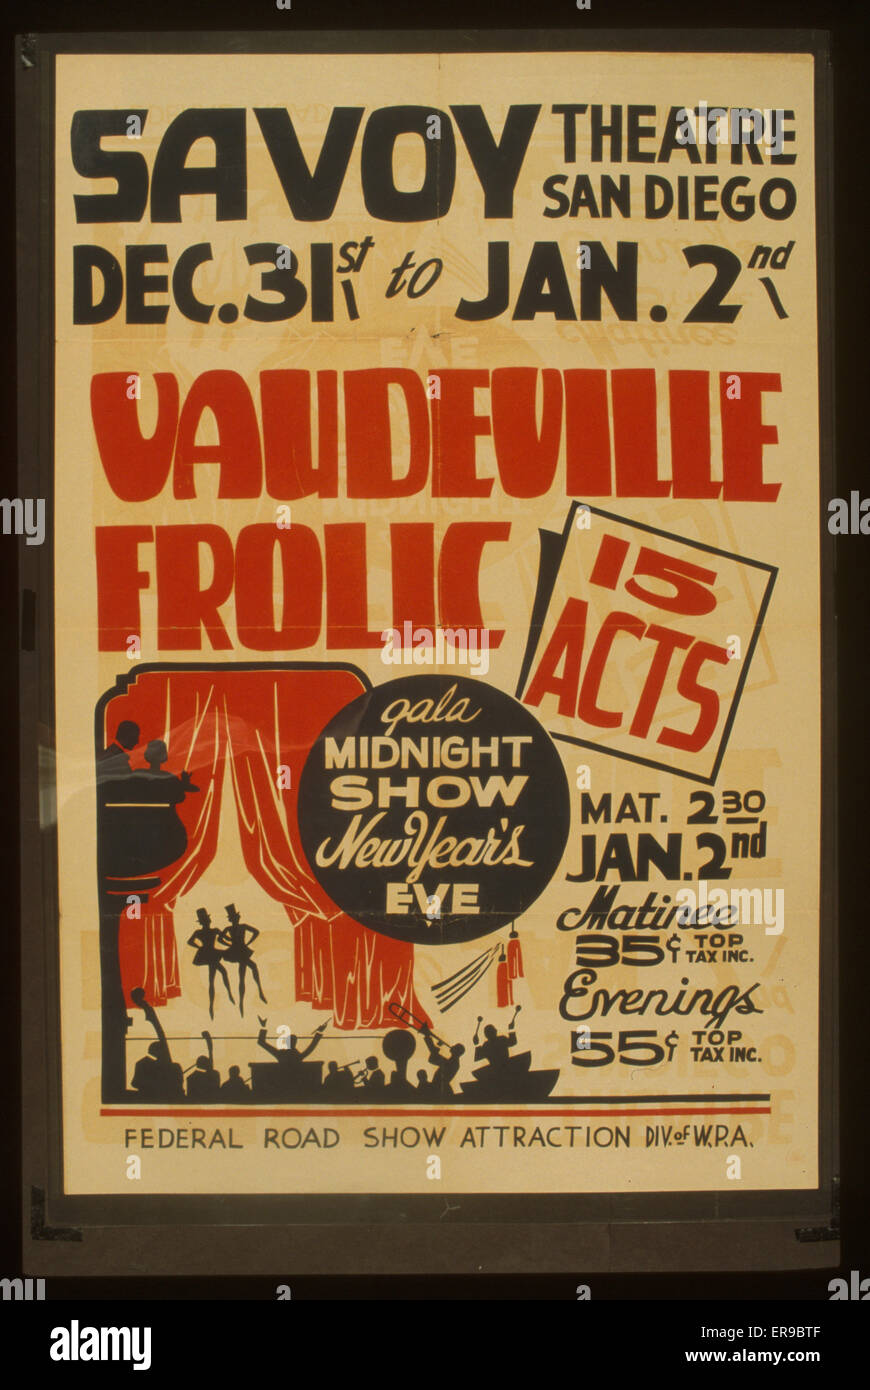 Vaudeville frolic 15 acts : Gala midnight show New Year's eve. Poster for Federal Theatre Project presentation of Vaudeville Frolic at the Savoy Theatre, San Diego, California, showing stage production with orchestra. Date between 1936 and 1941. Stock Photo